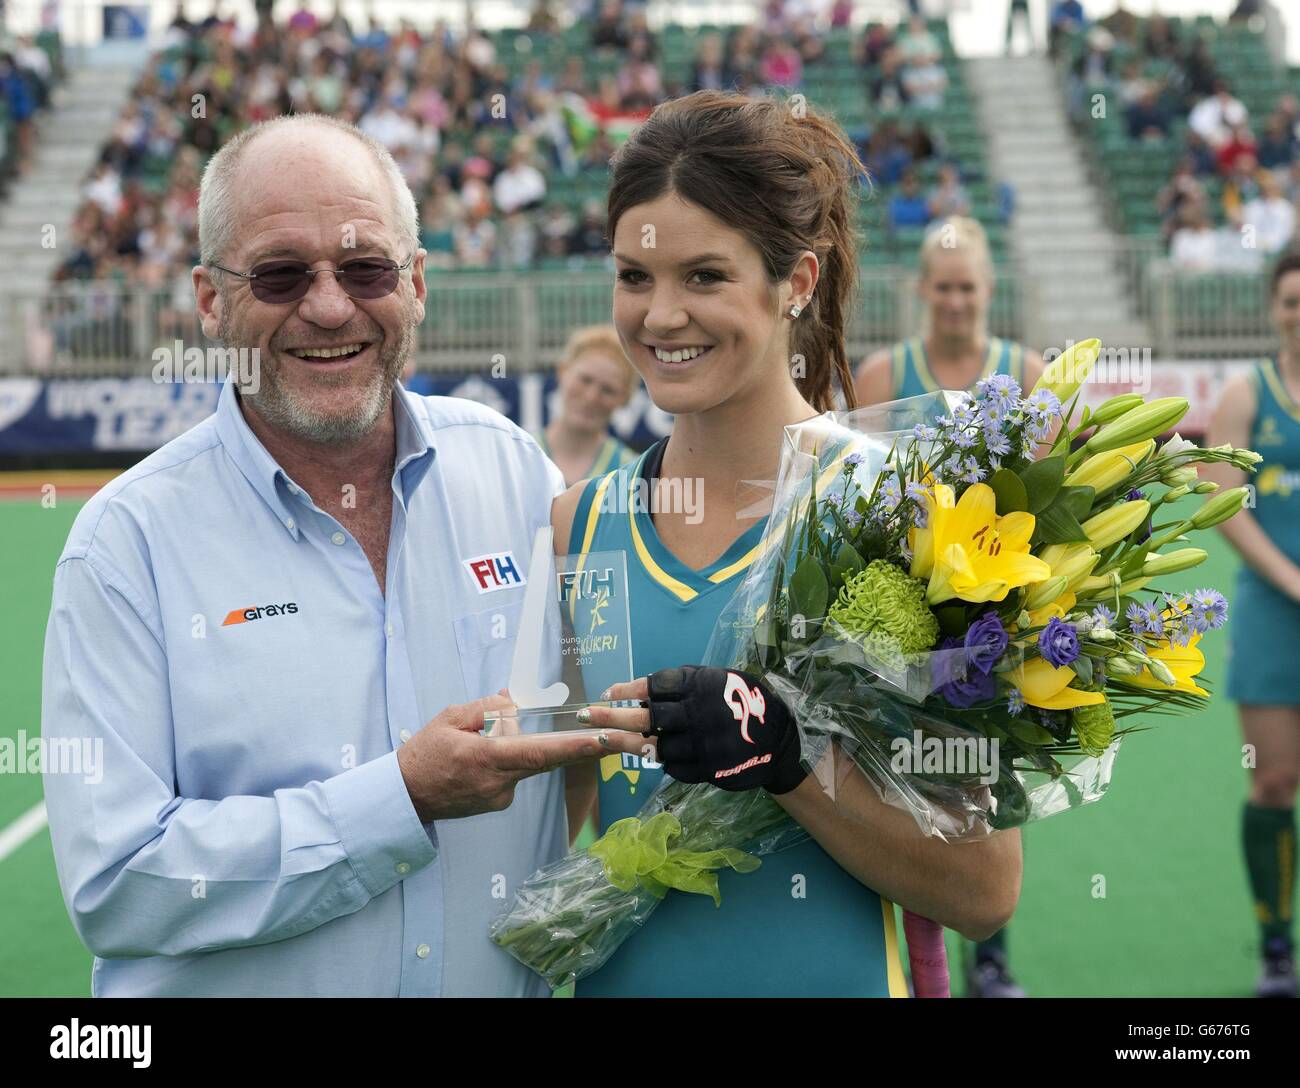 Hockey - Investec World League Semi Finals - Australia v South Africa - Chiswick. Australia's Anna Flanagan recieves the young Player of the year award during the Investec World League Semi Finals, Chiswick. Stock Photo